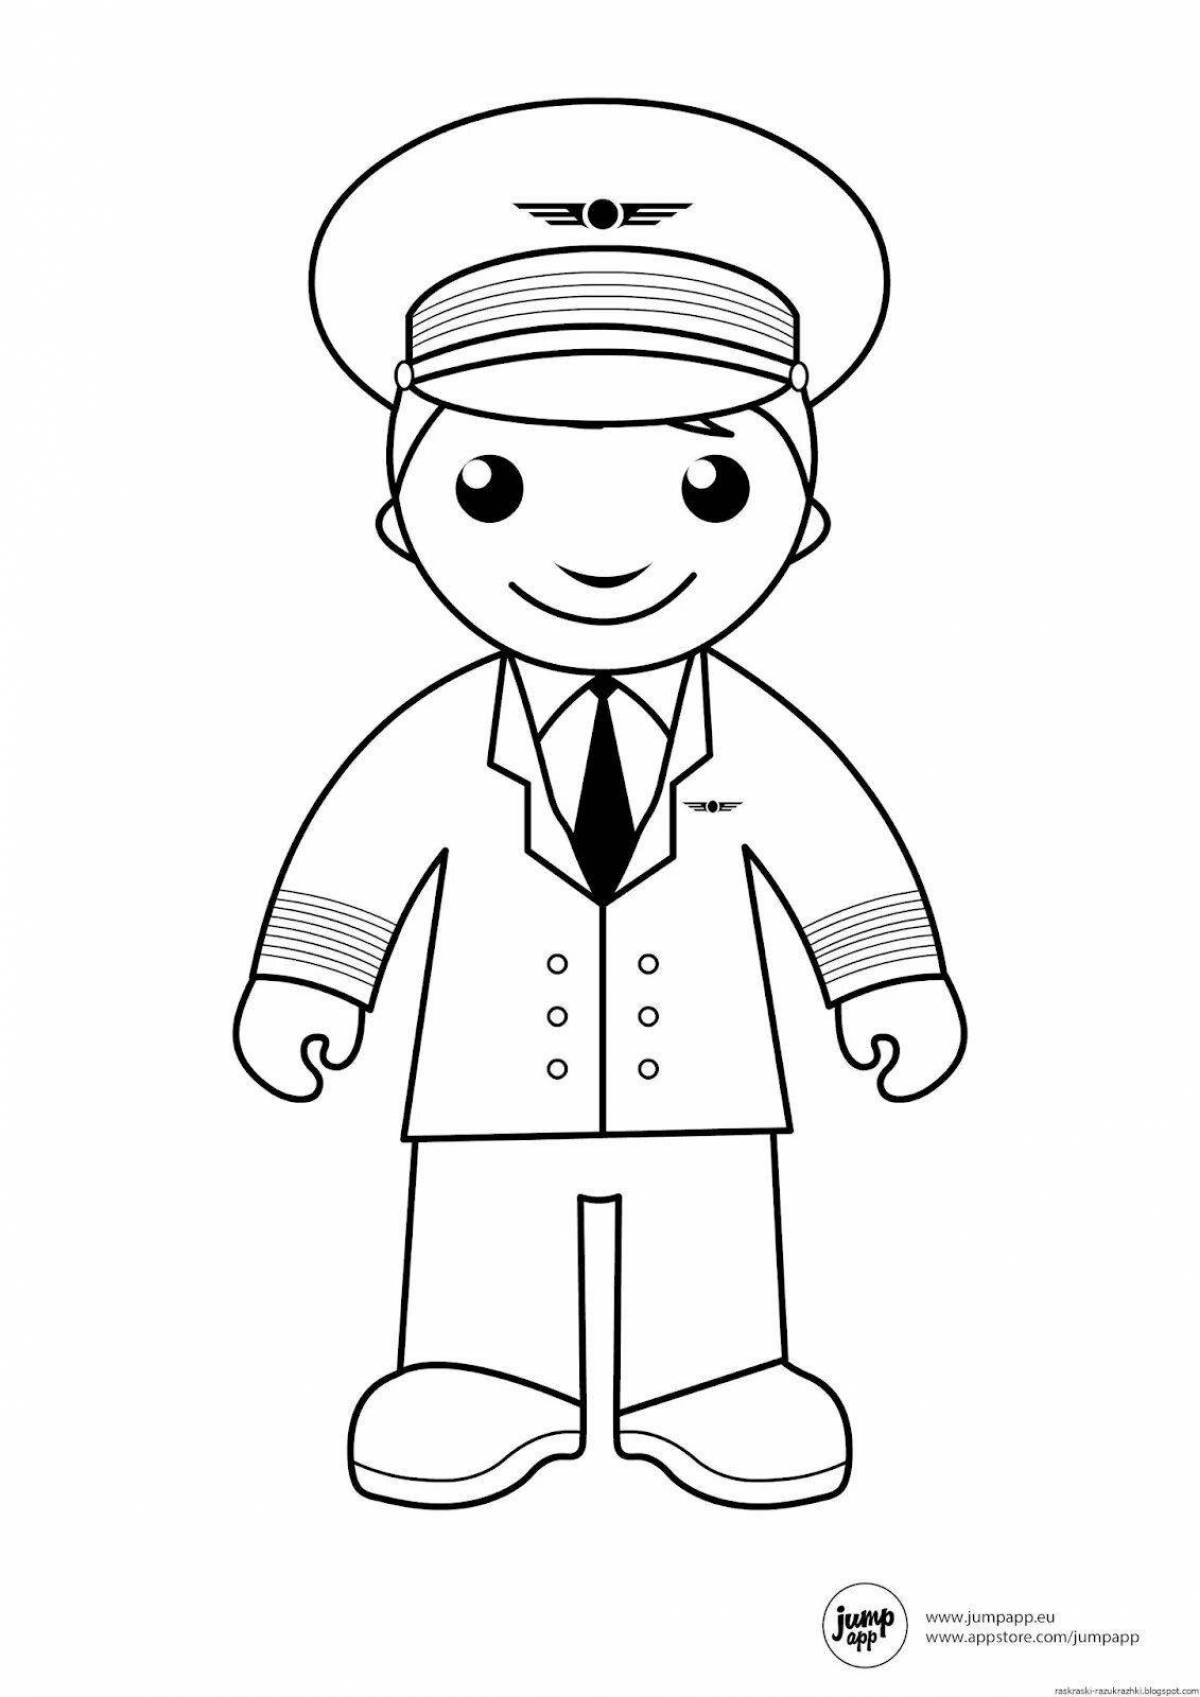 Exciting coloring pages of professions in kindergarten